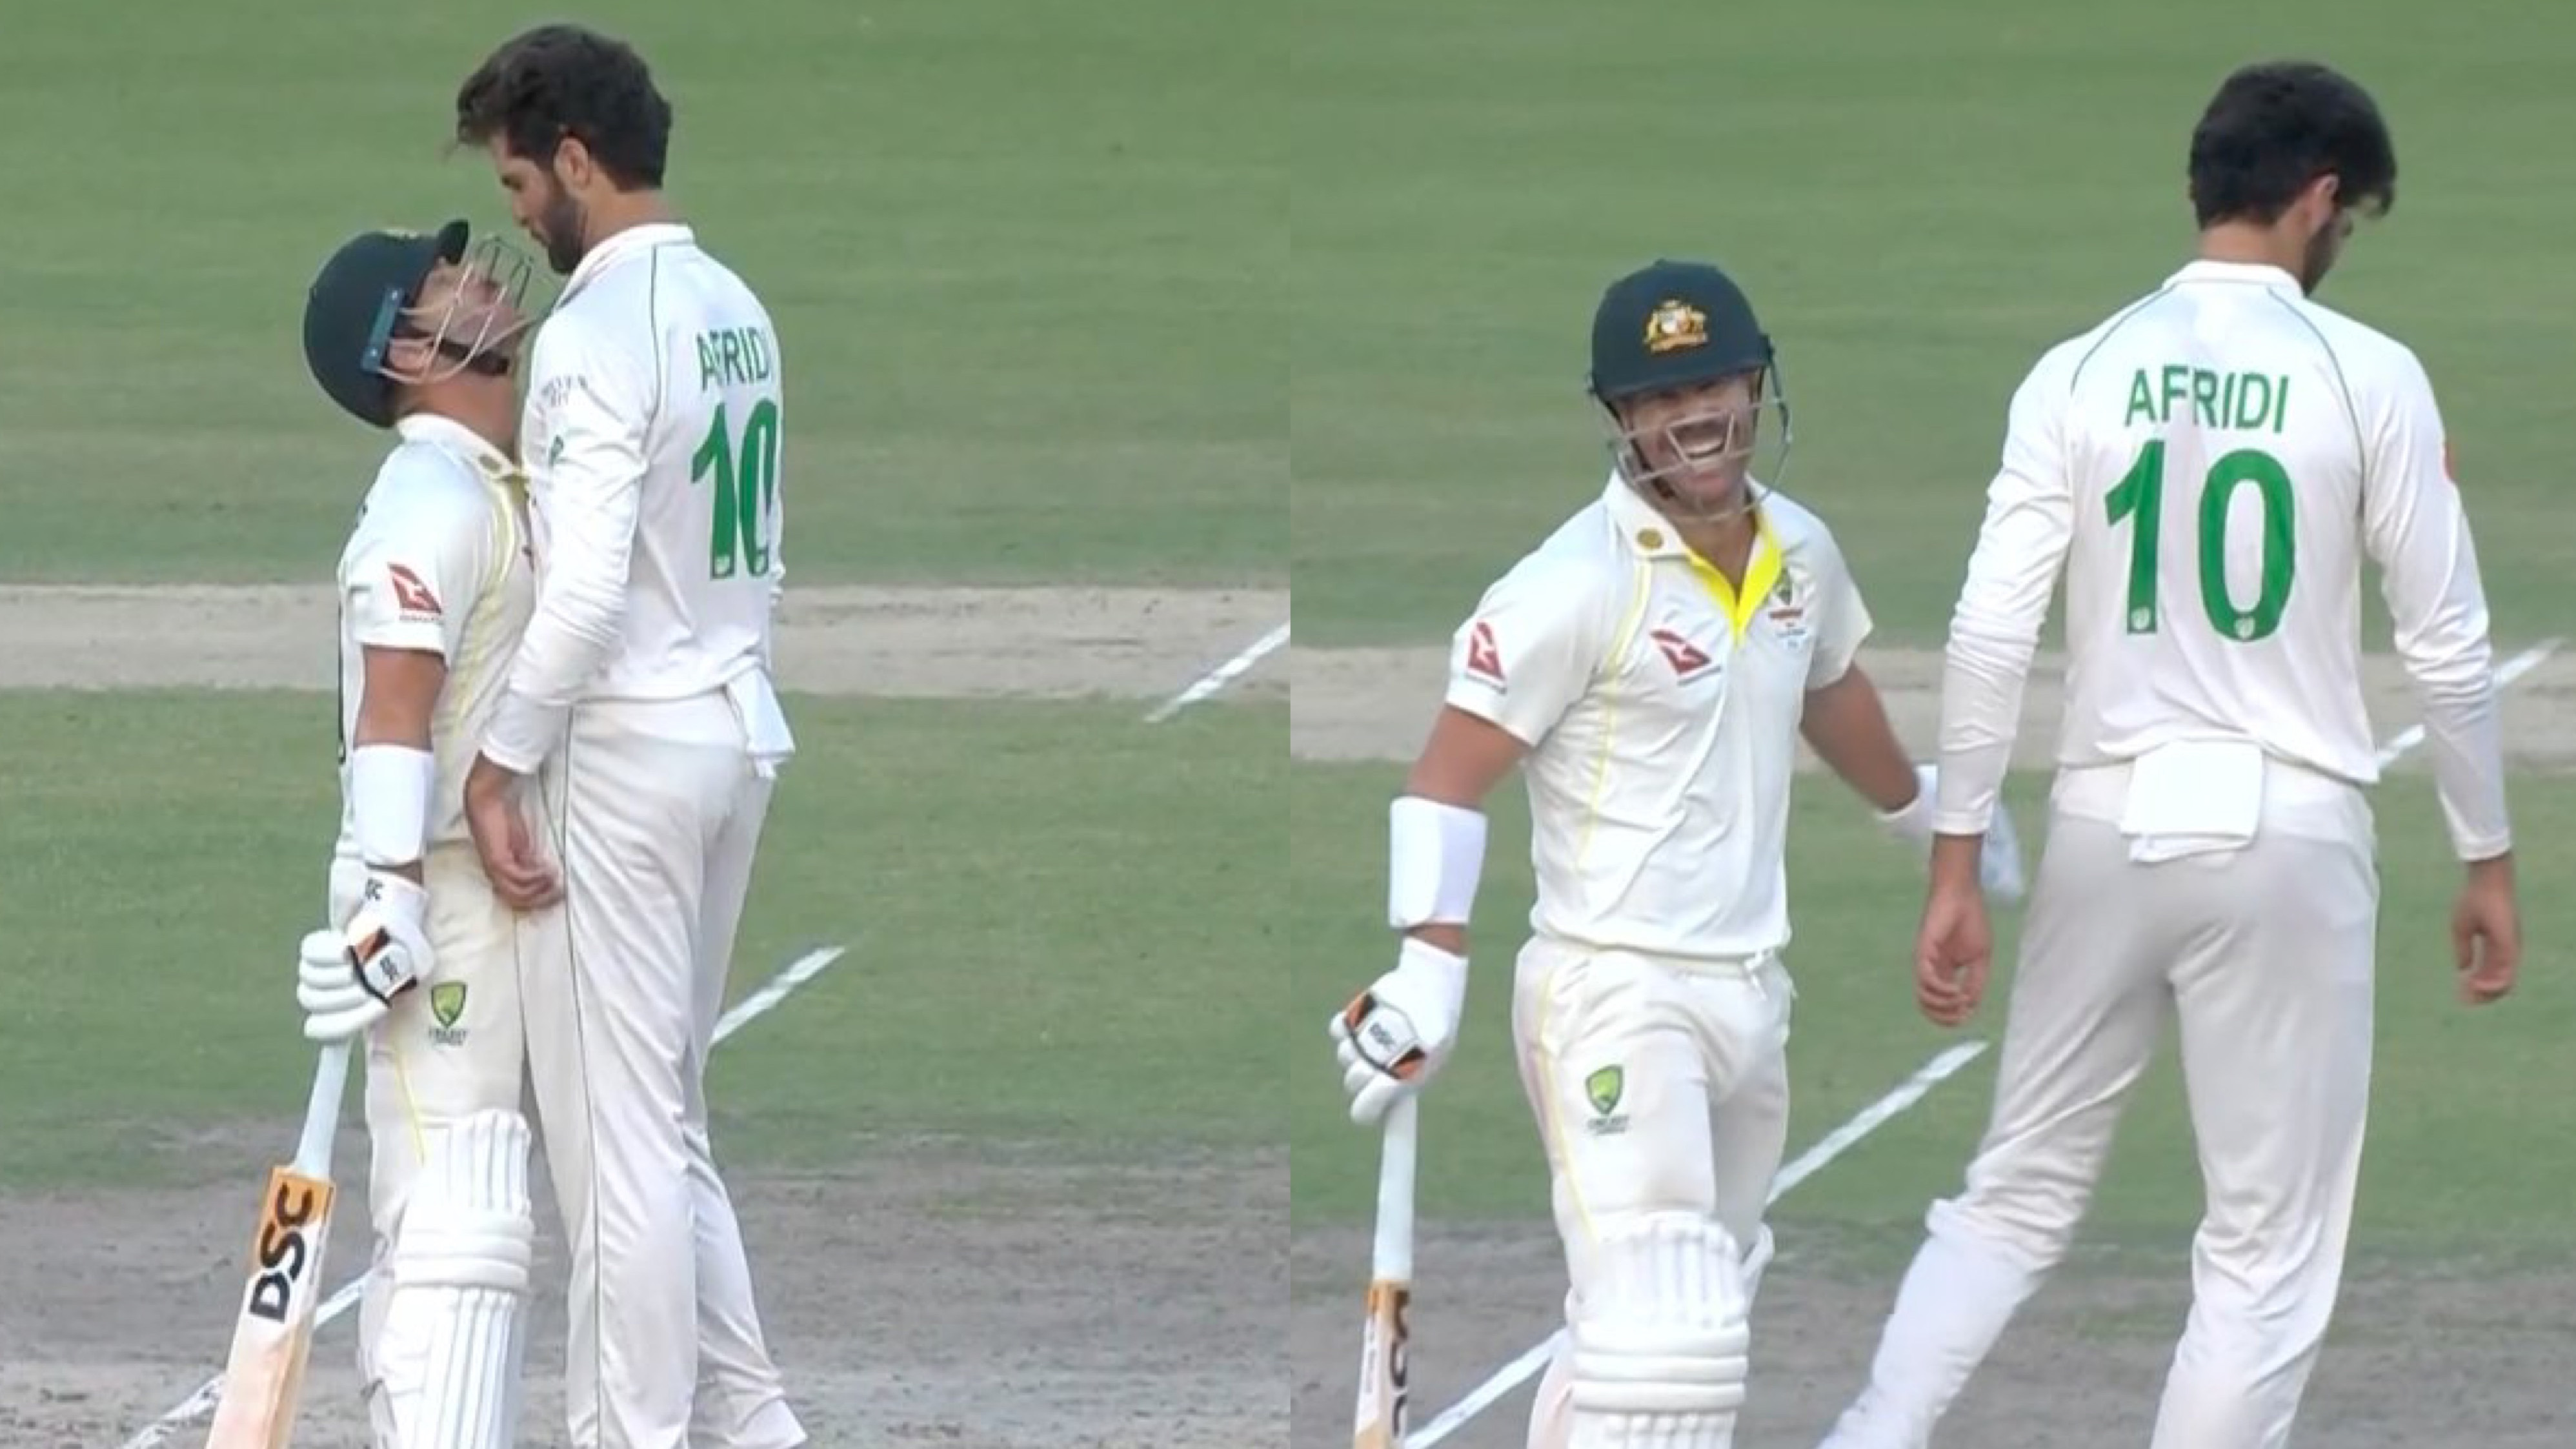 PAK v AUS 2022: Twitterati react hilariously after Warner and Afridi share a funny moment on Day 3